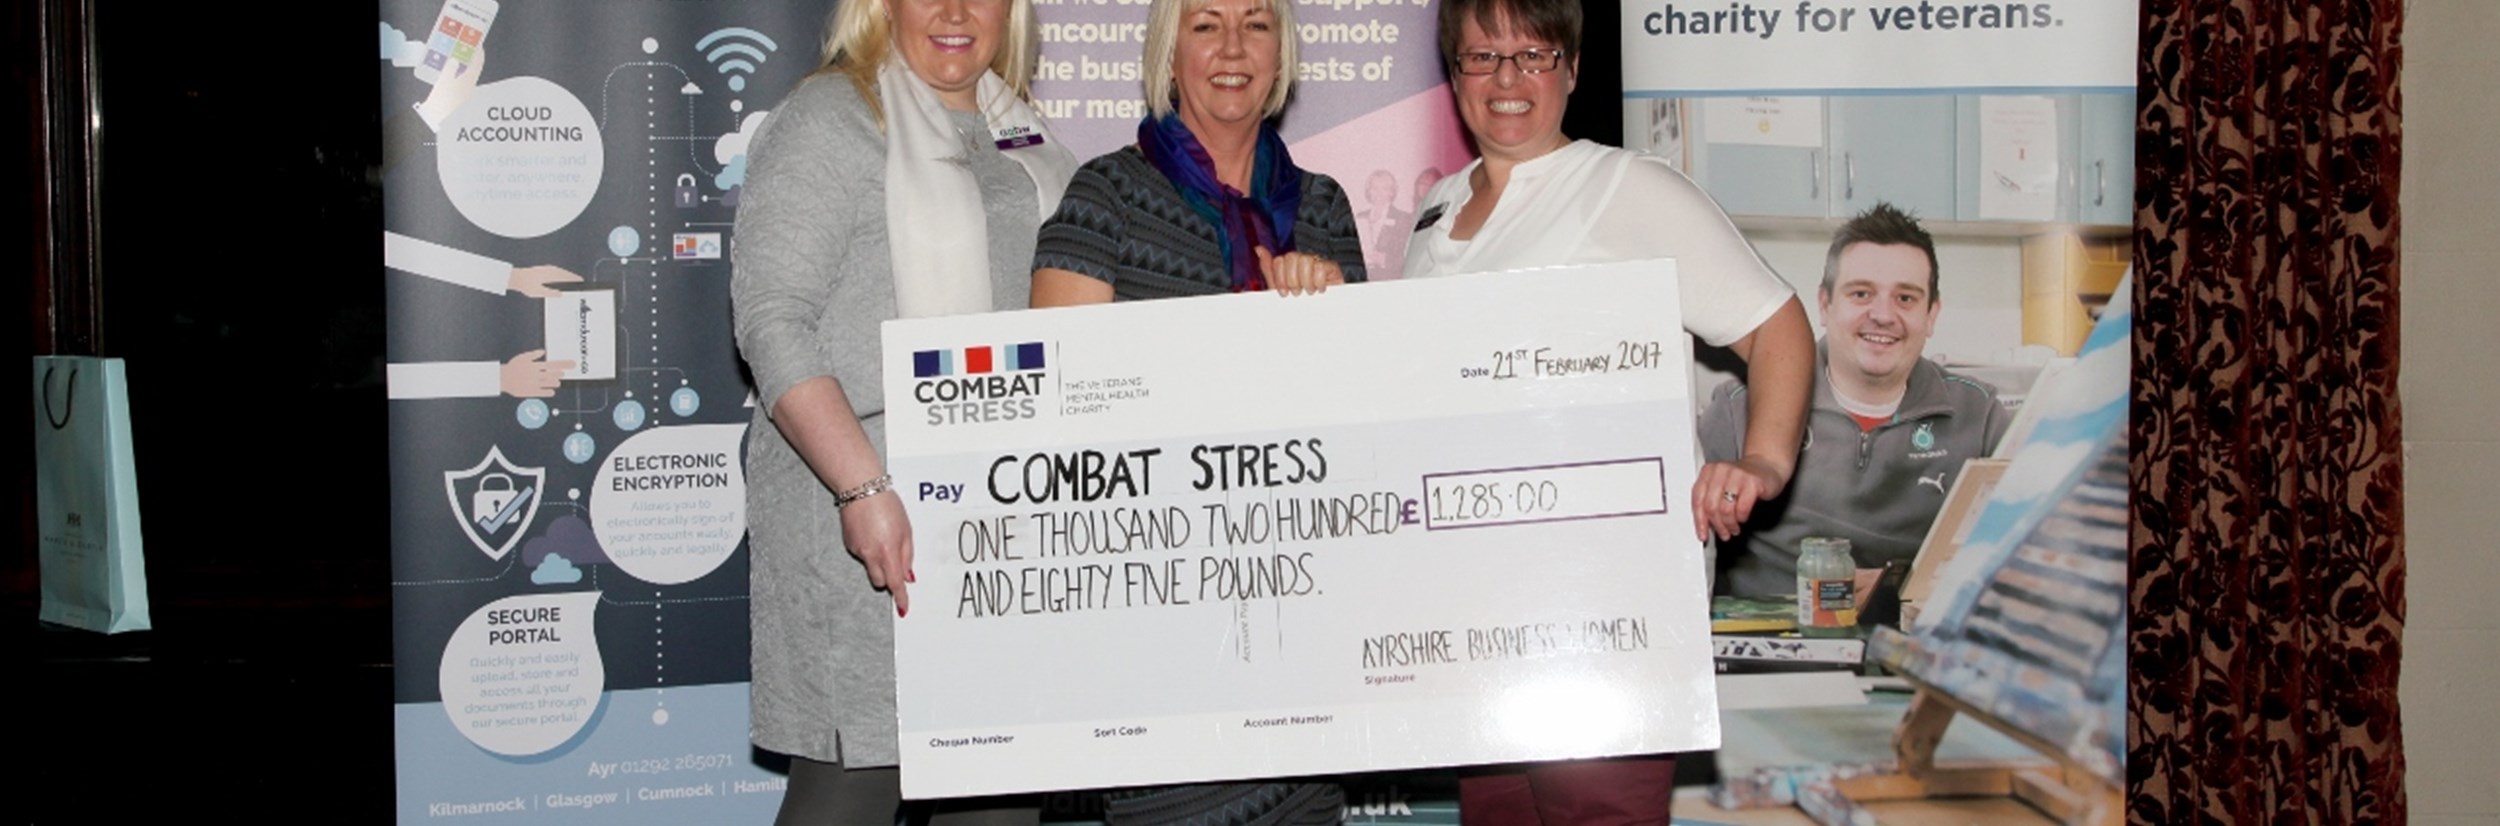 Charity Donation to Combat Stress